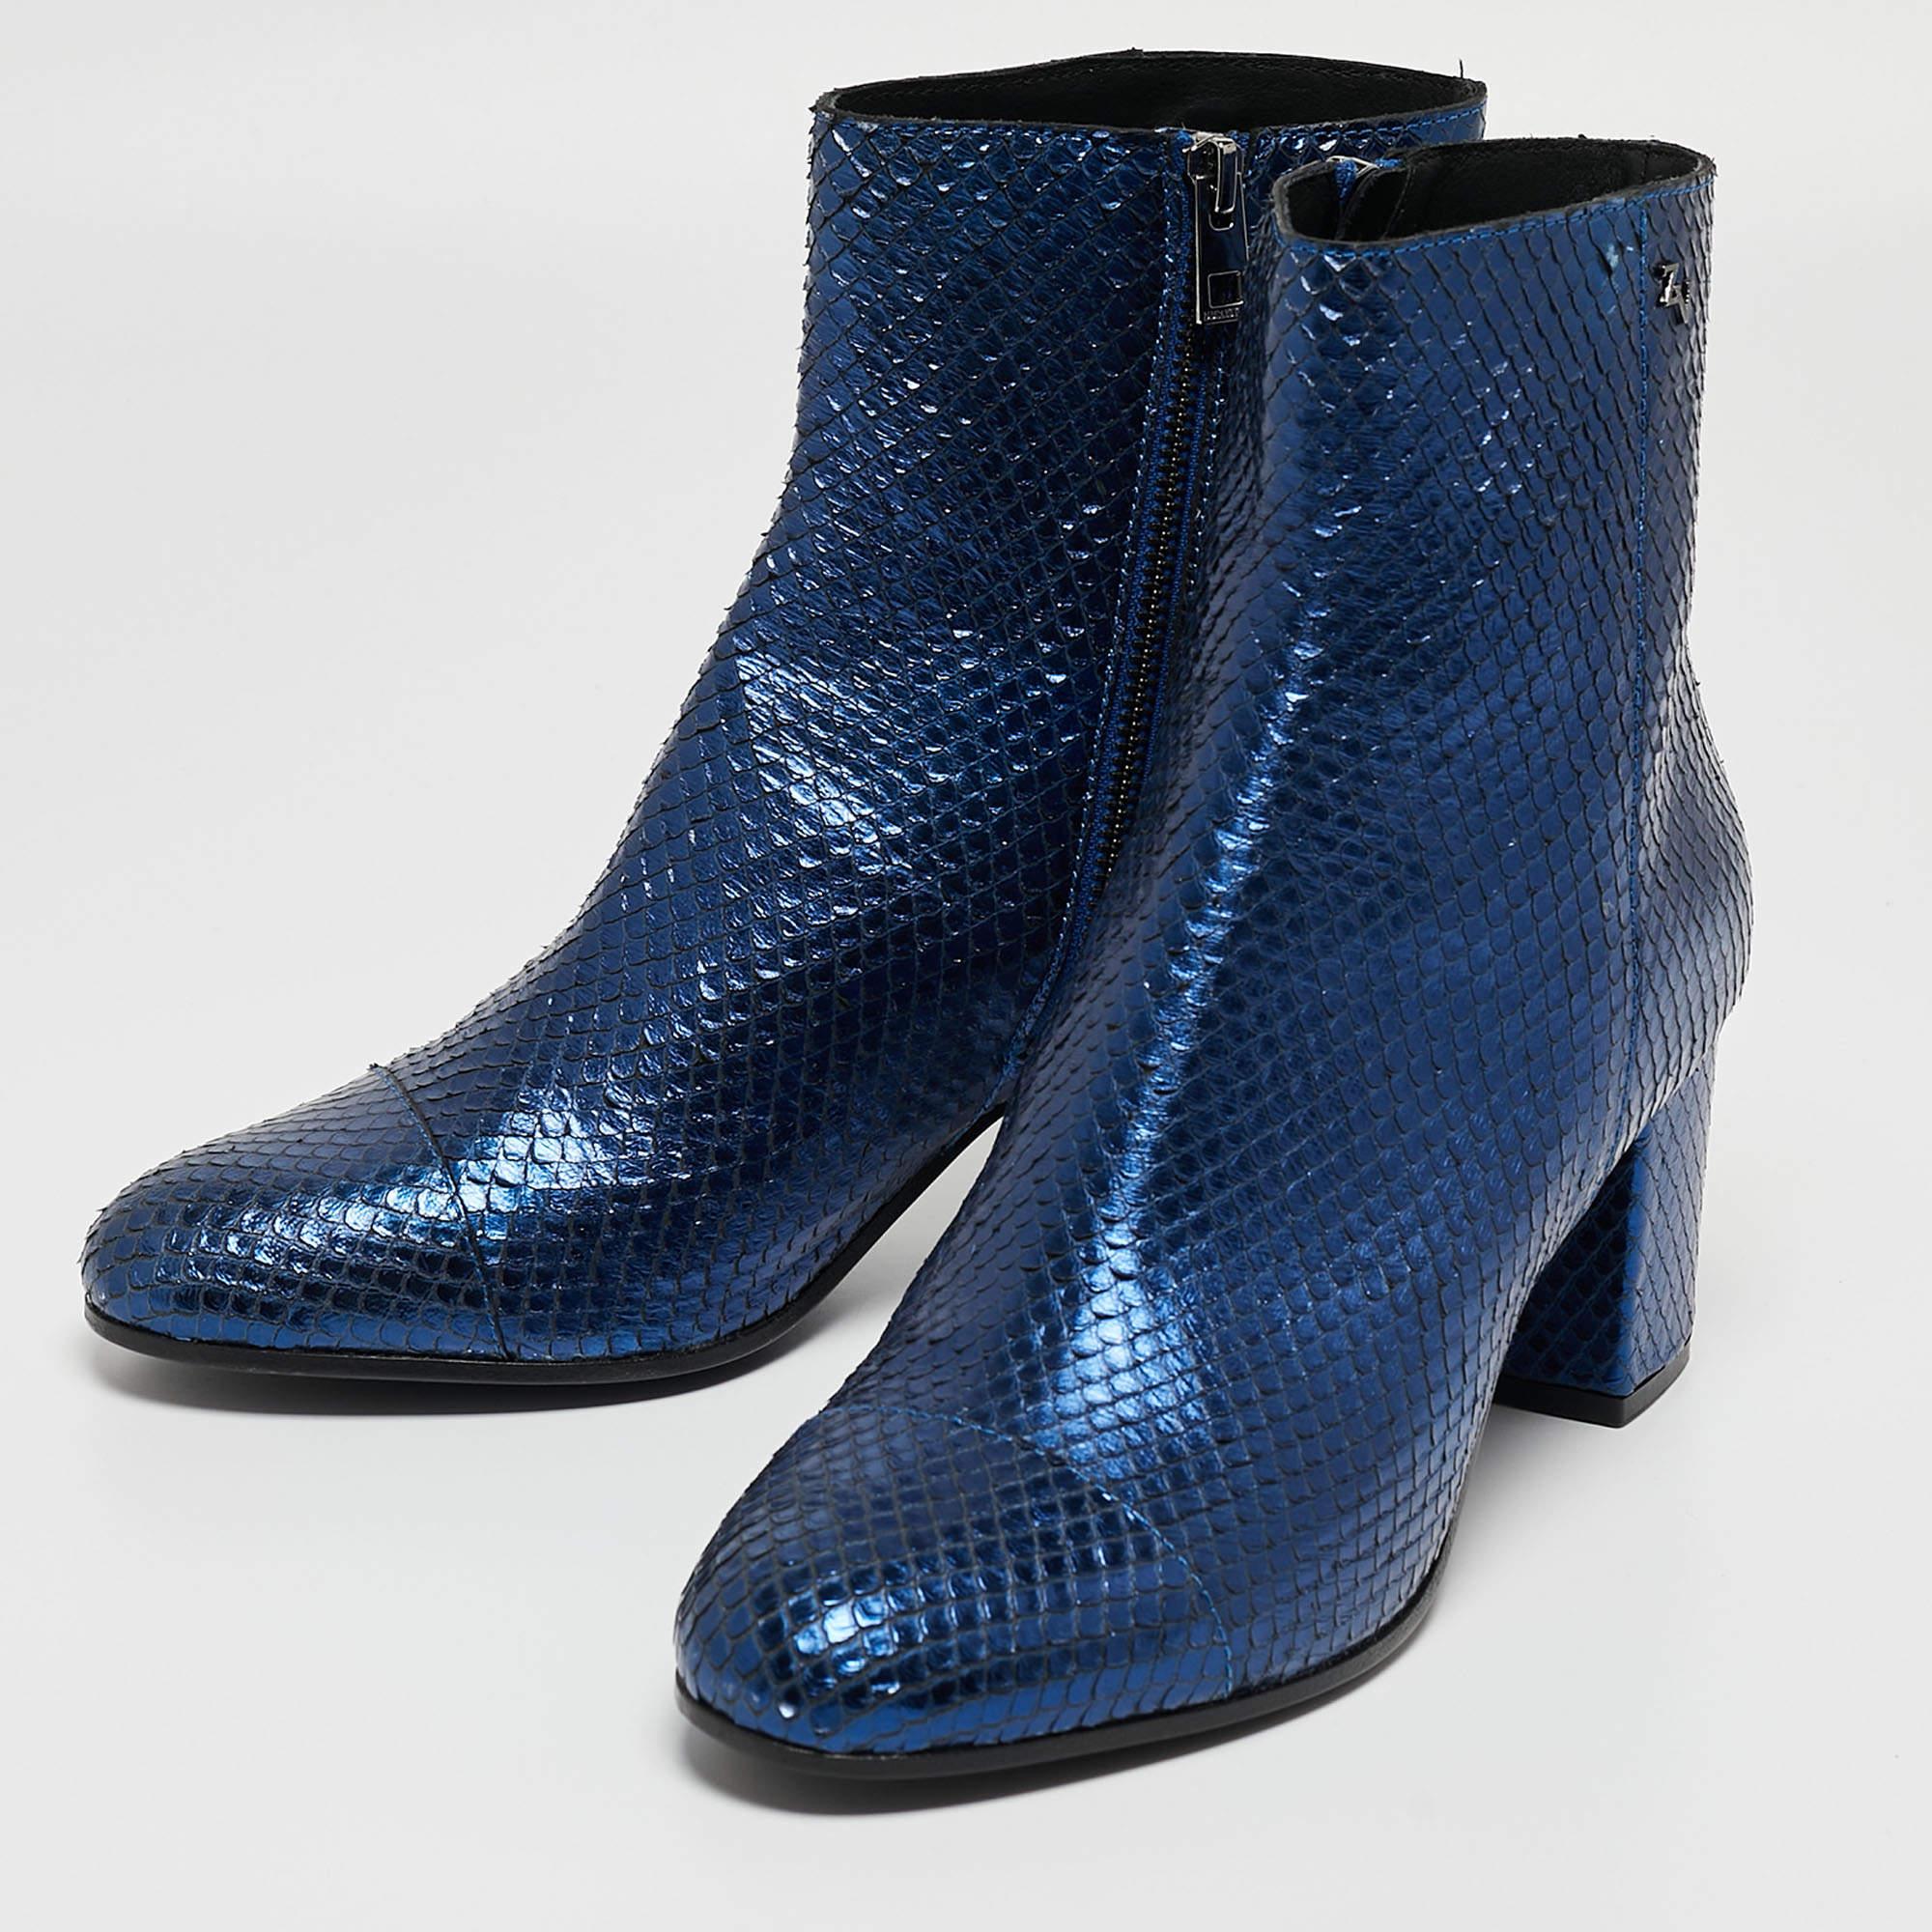 Zadiq & Voltaire Blue Python Embossed Leather Block Heel Ankle Boots Size 40 2